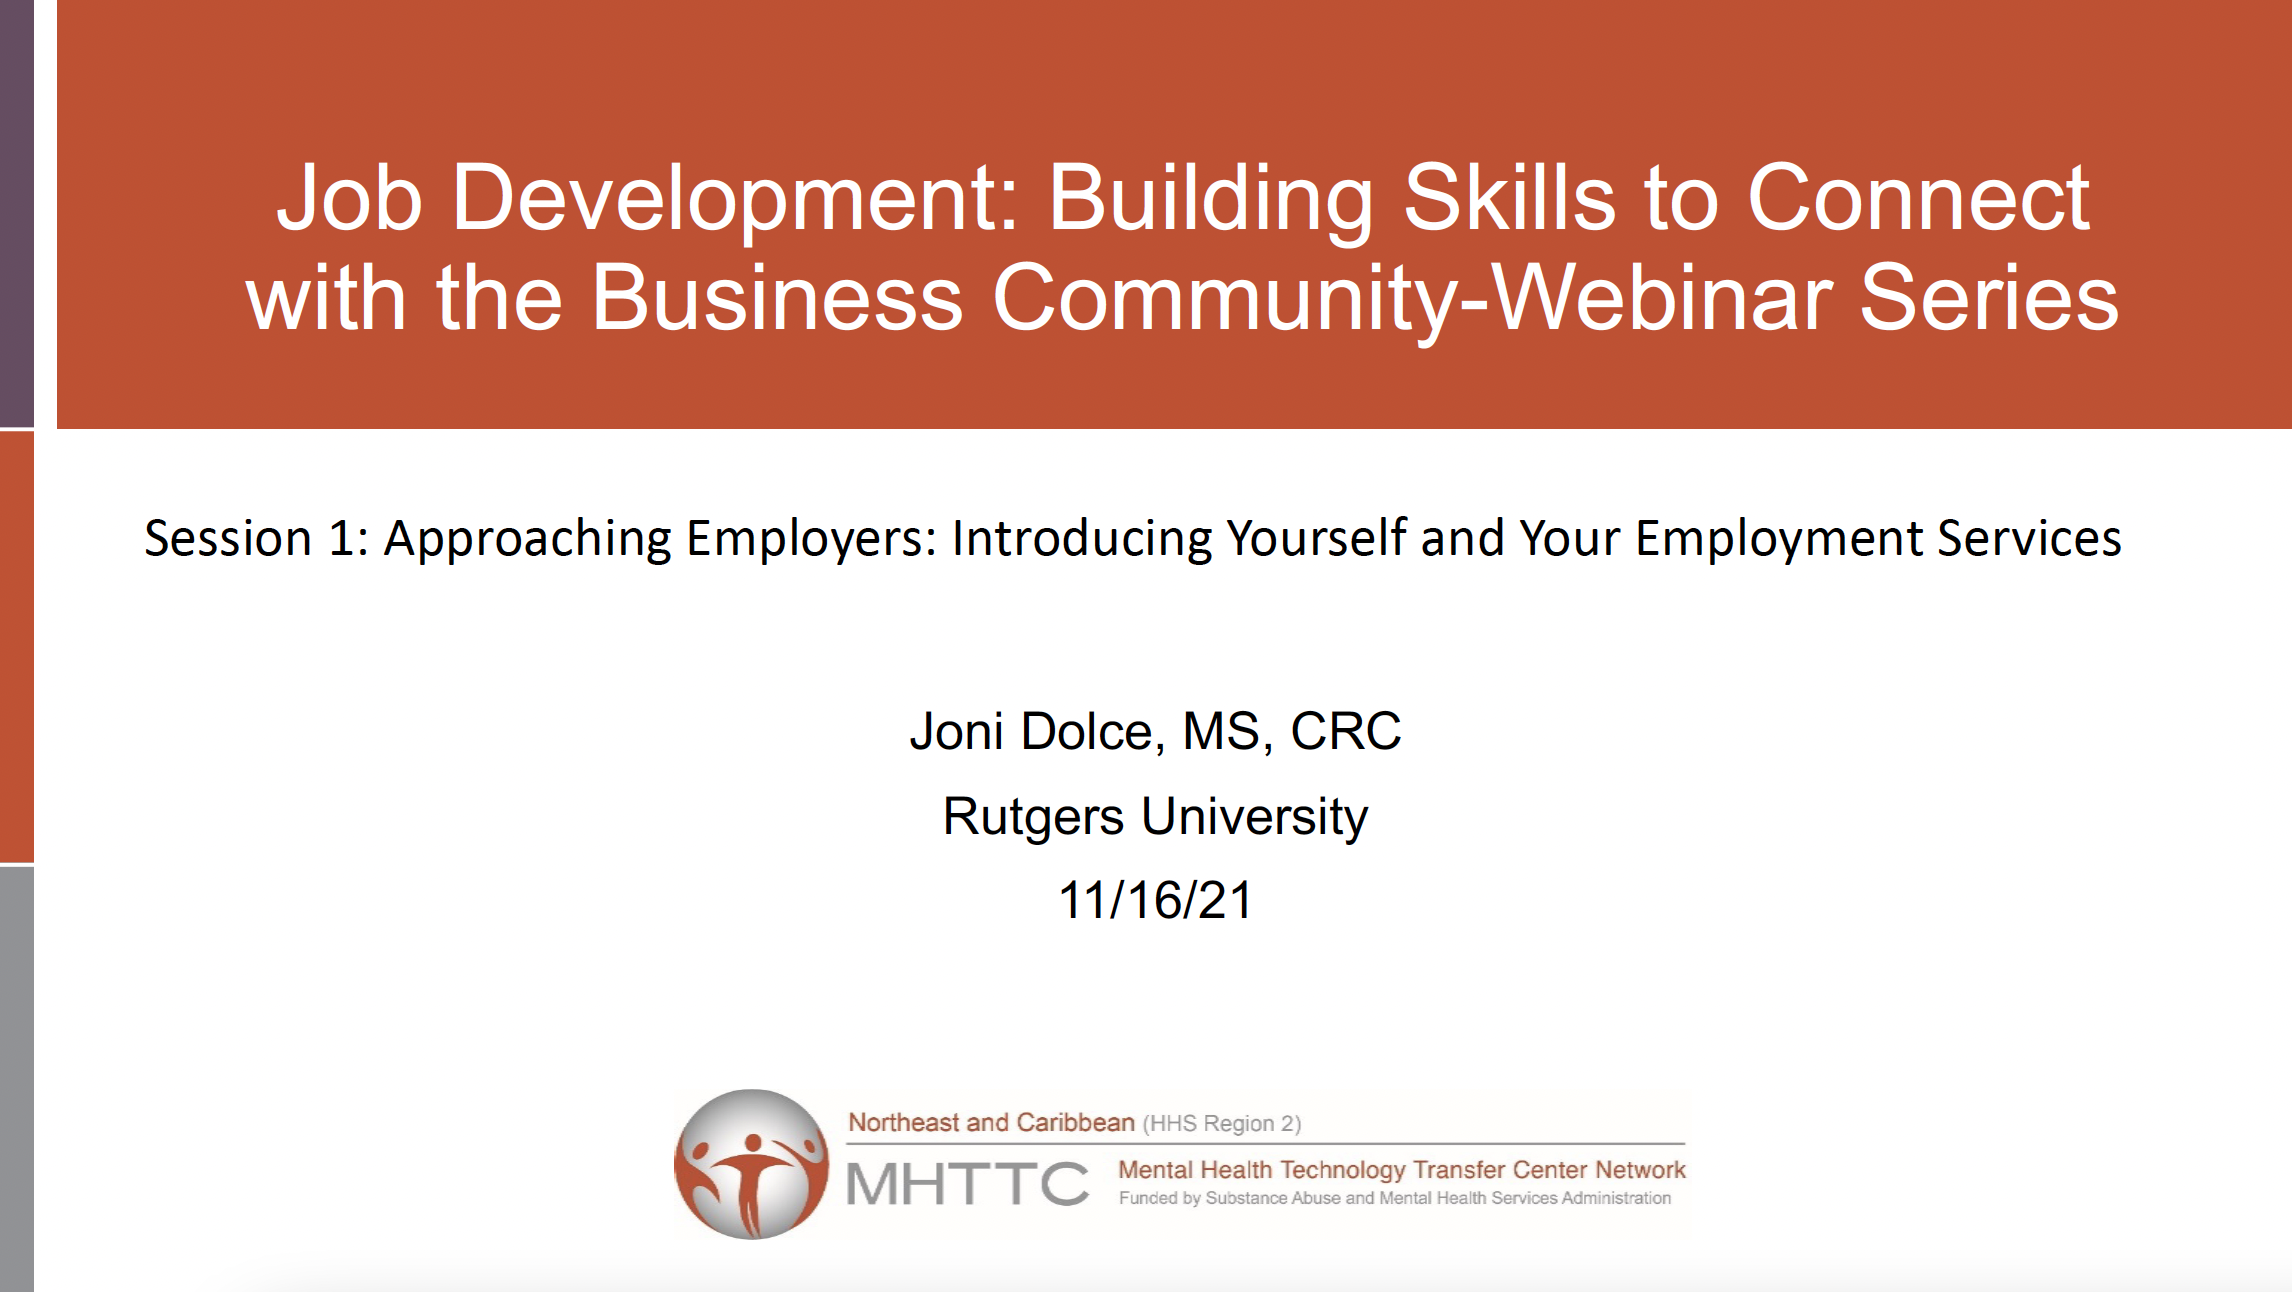 Job Development: Building Skills to Connect with the Business Community, Session 1: Approaching Employers: Introducing Yourself and Your Employment Services